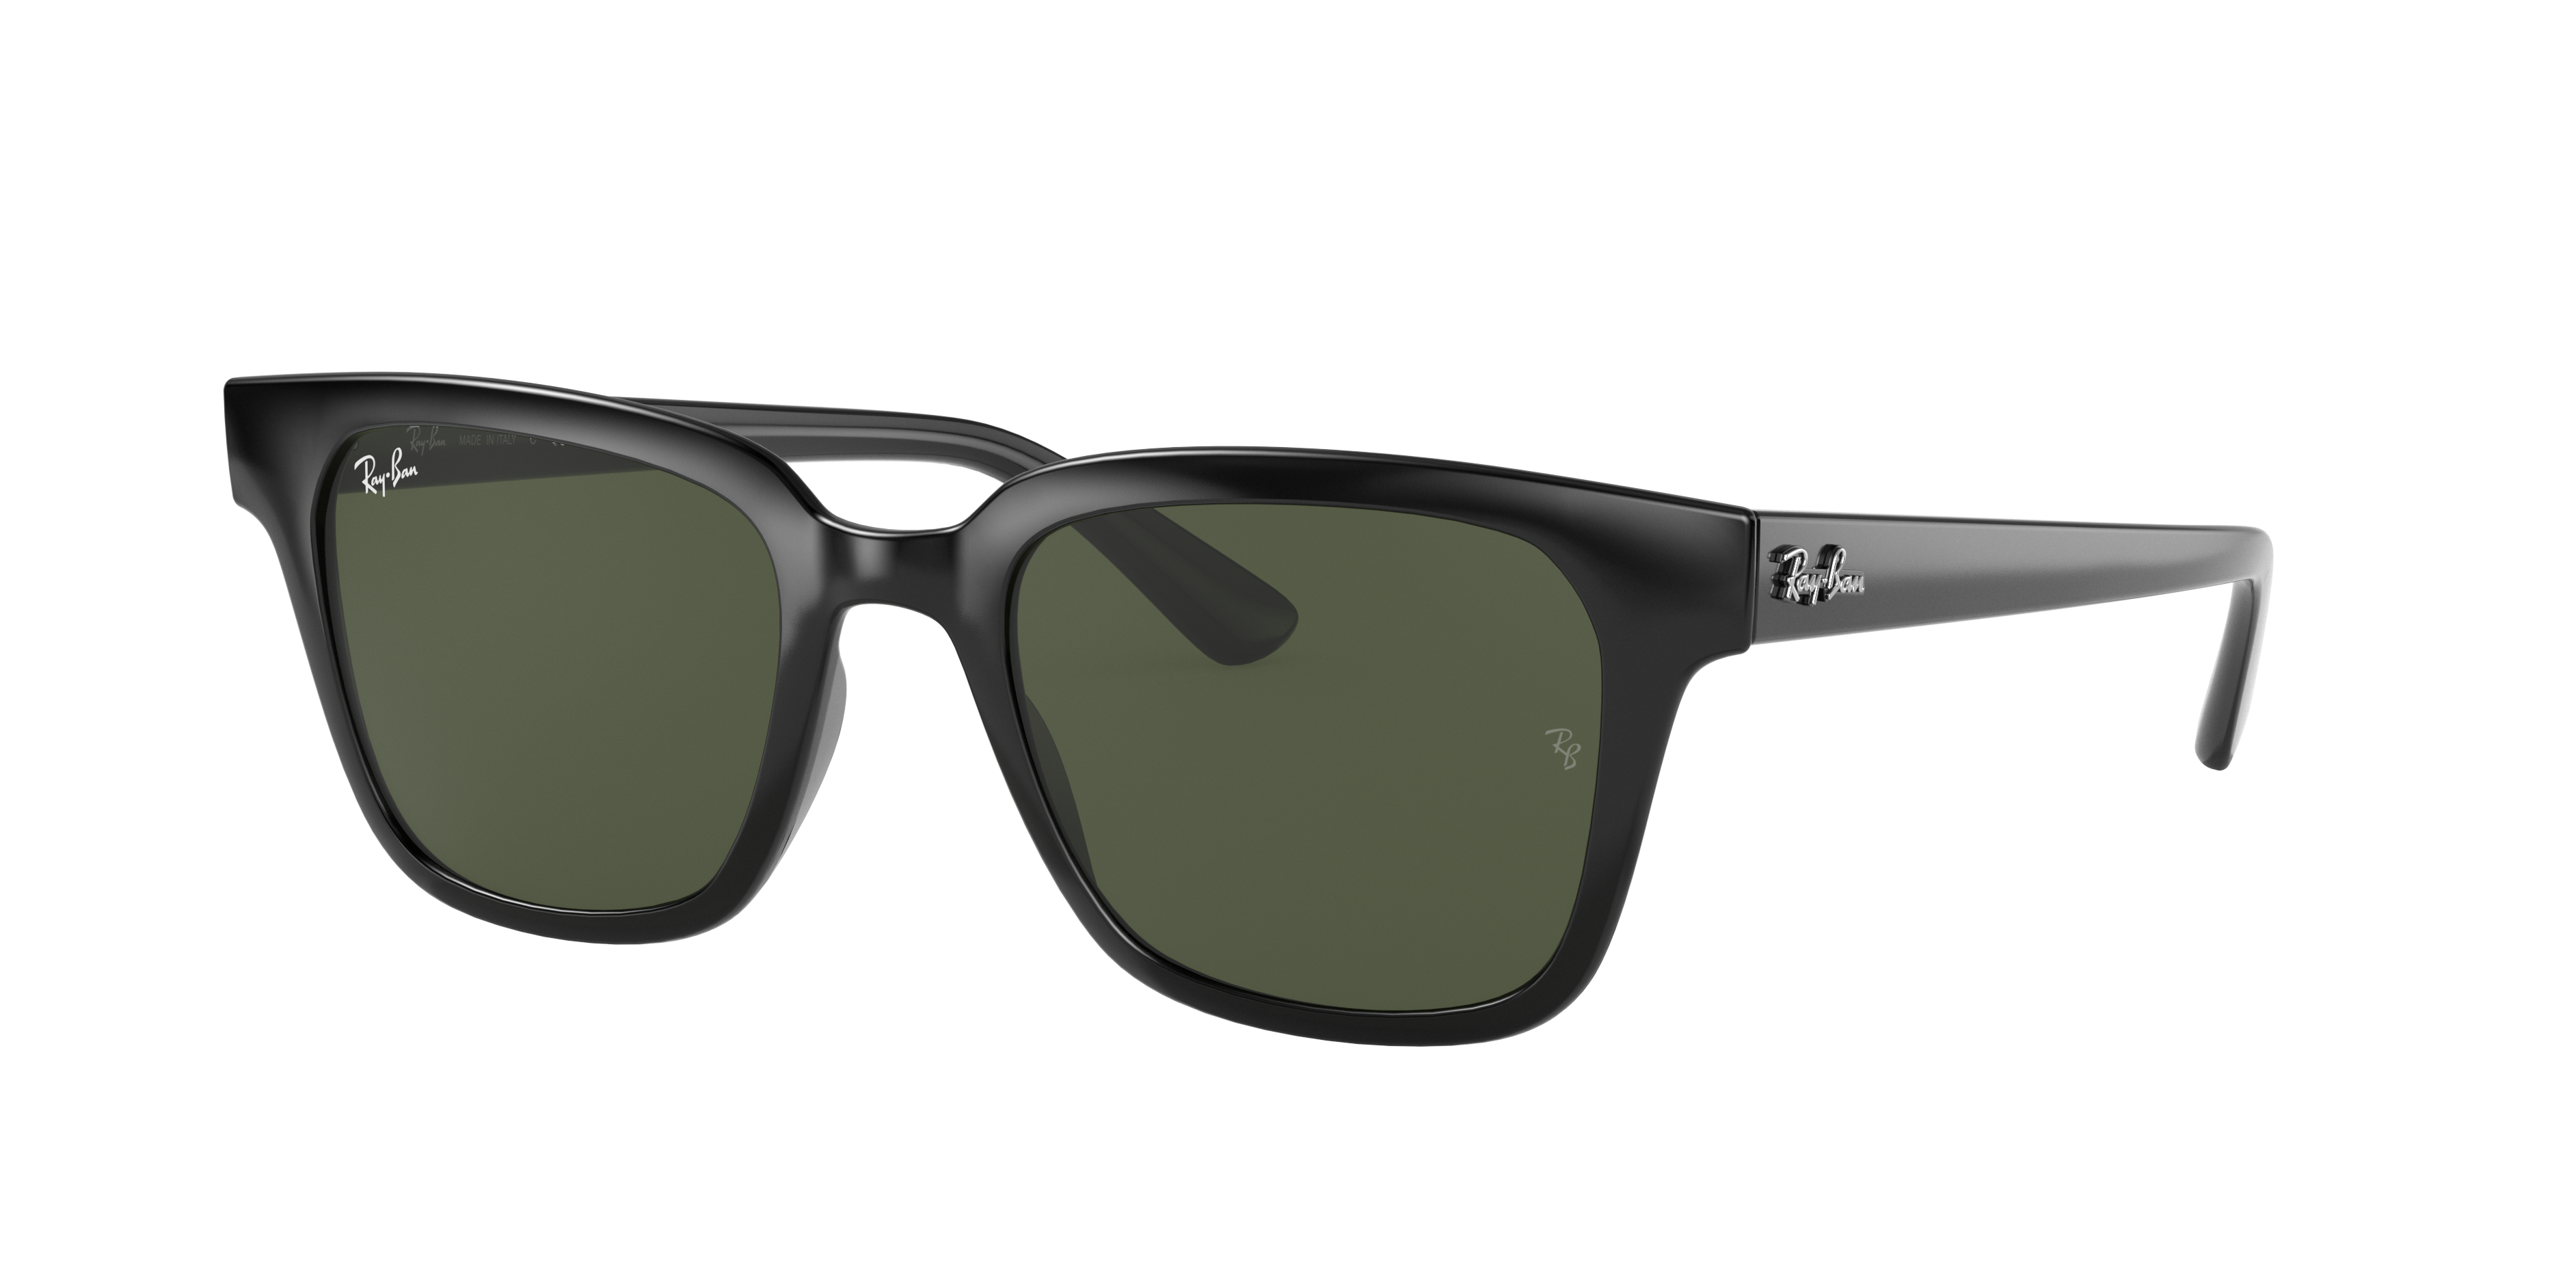 Check out the Rb4323 at ray-ban.com